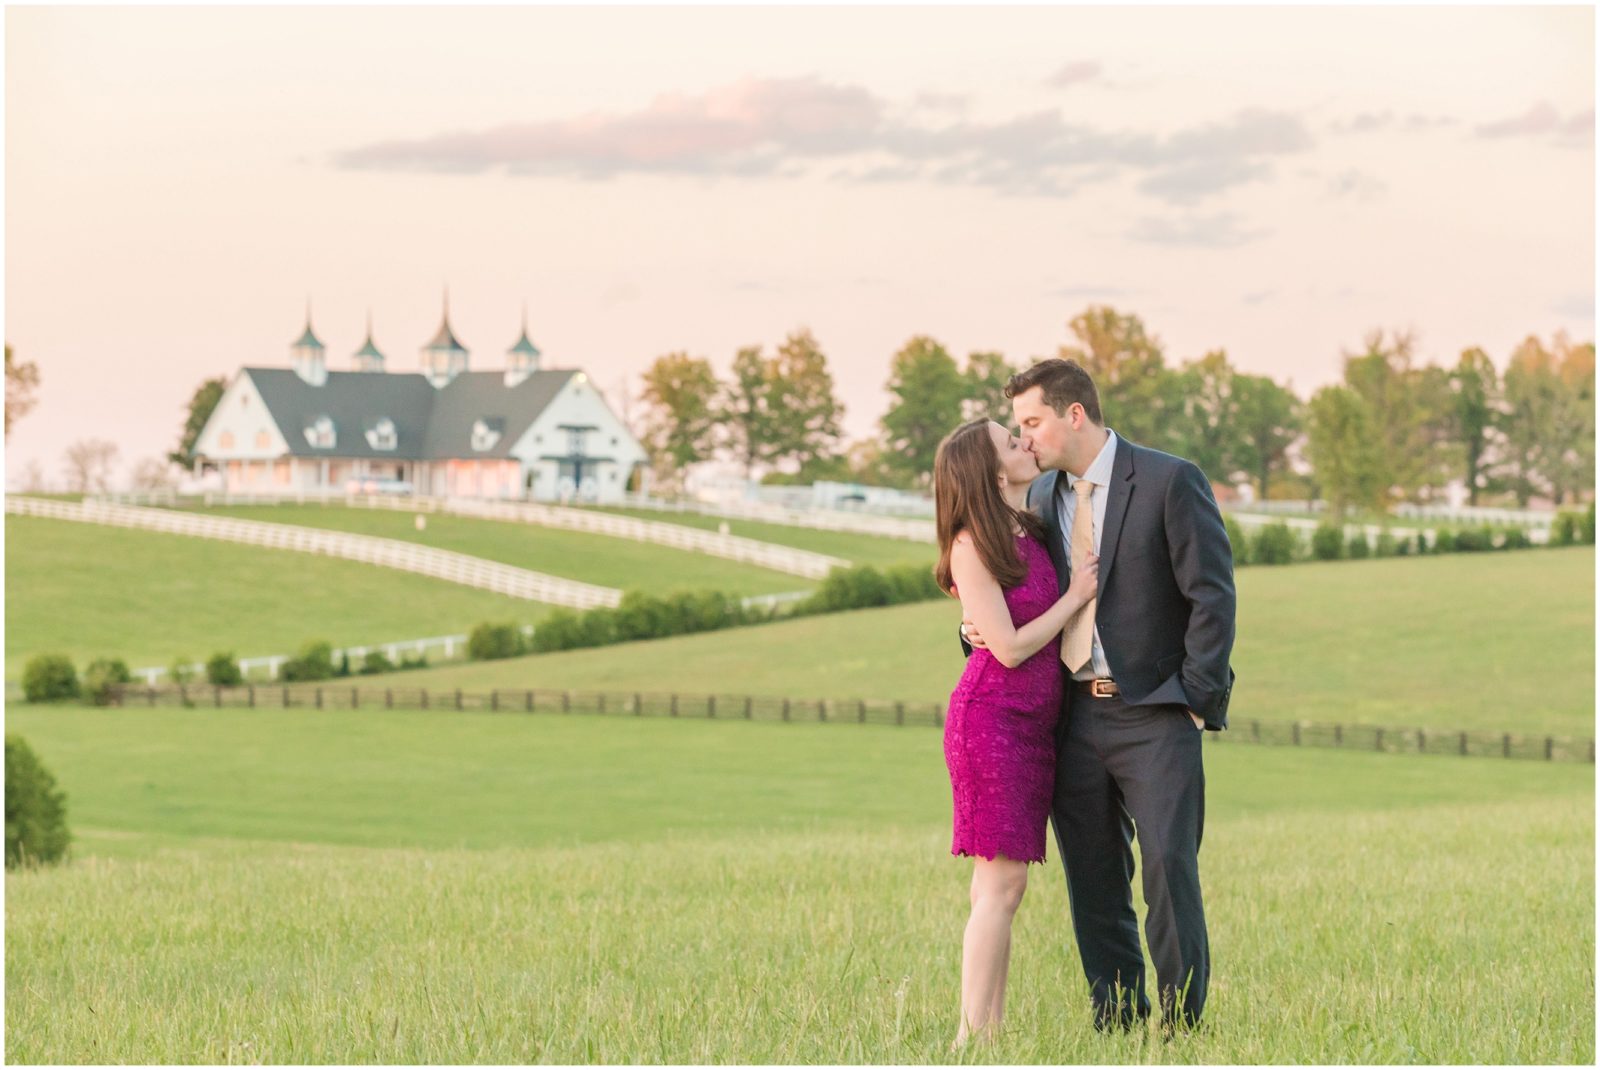 Engagement Session at Keeneland with Manchester Farm's iconic white barn in the background